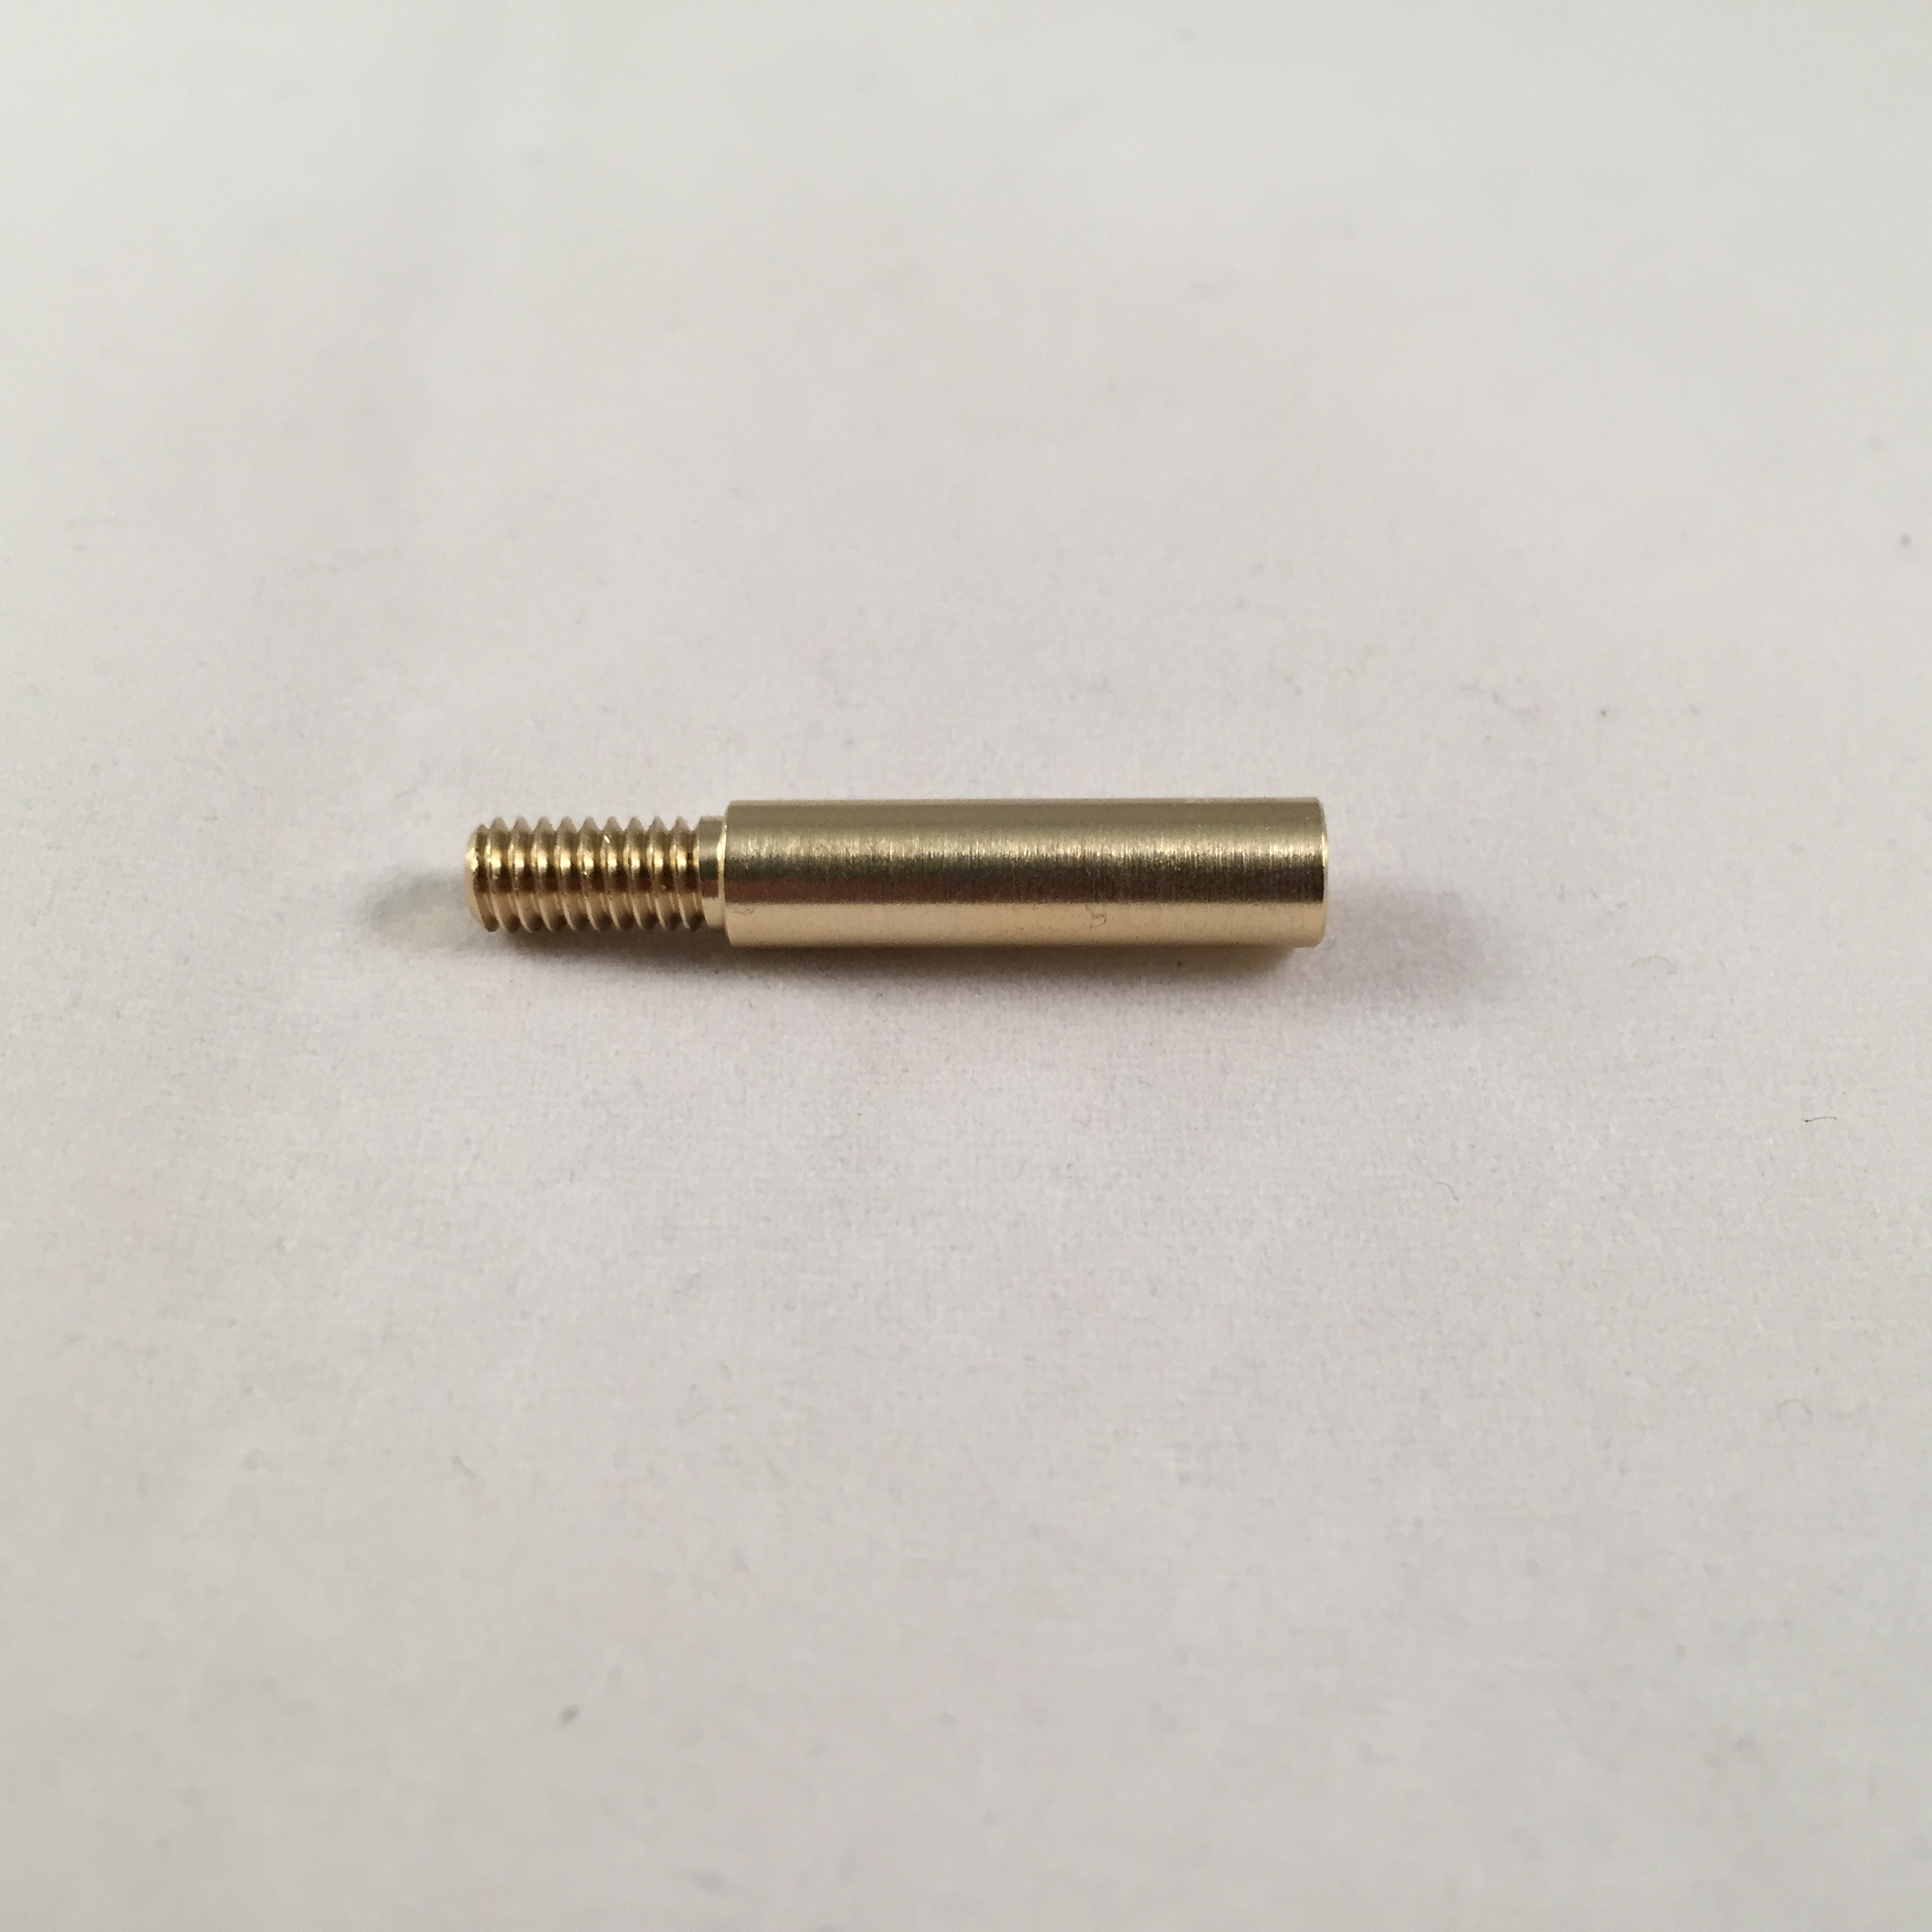 Use military brushes with 8-36 threads on commercial 8-32 rods Thread adapter